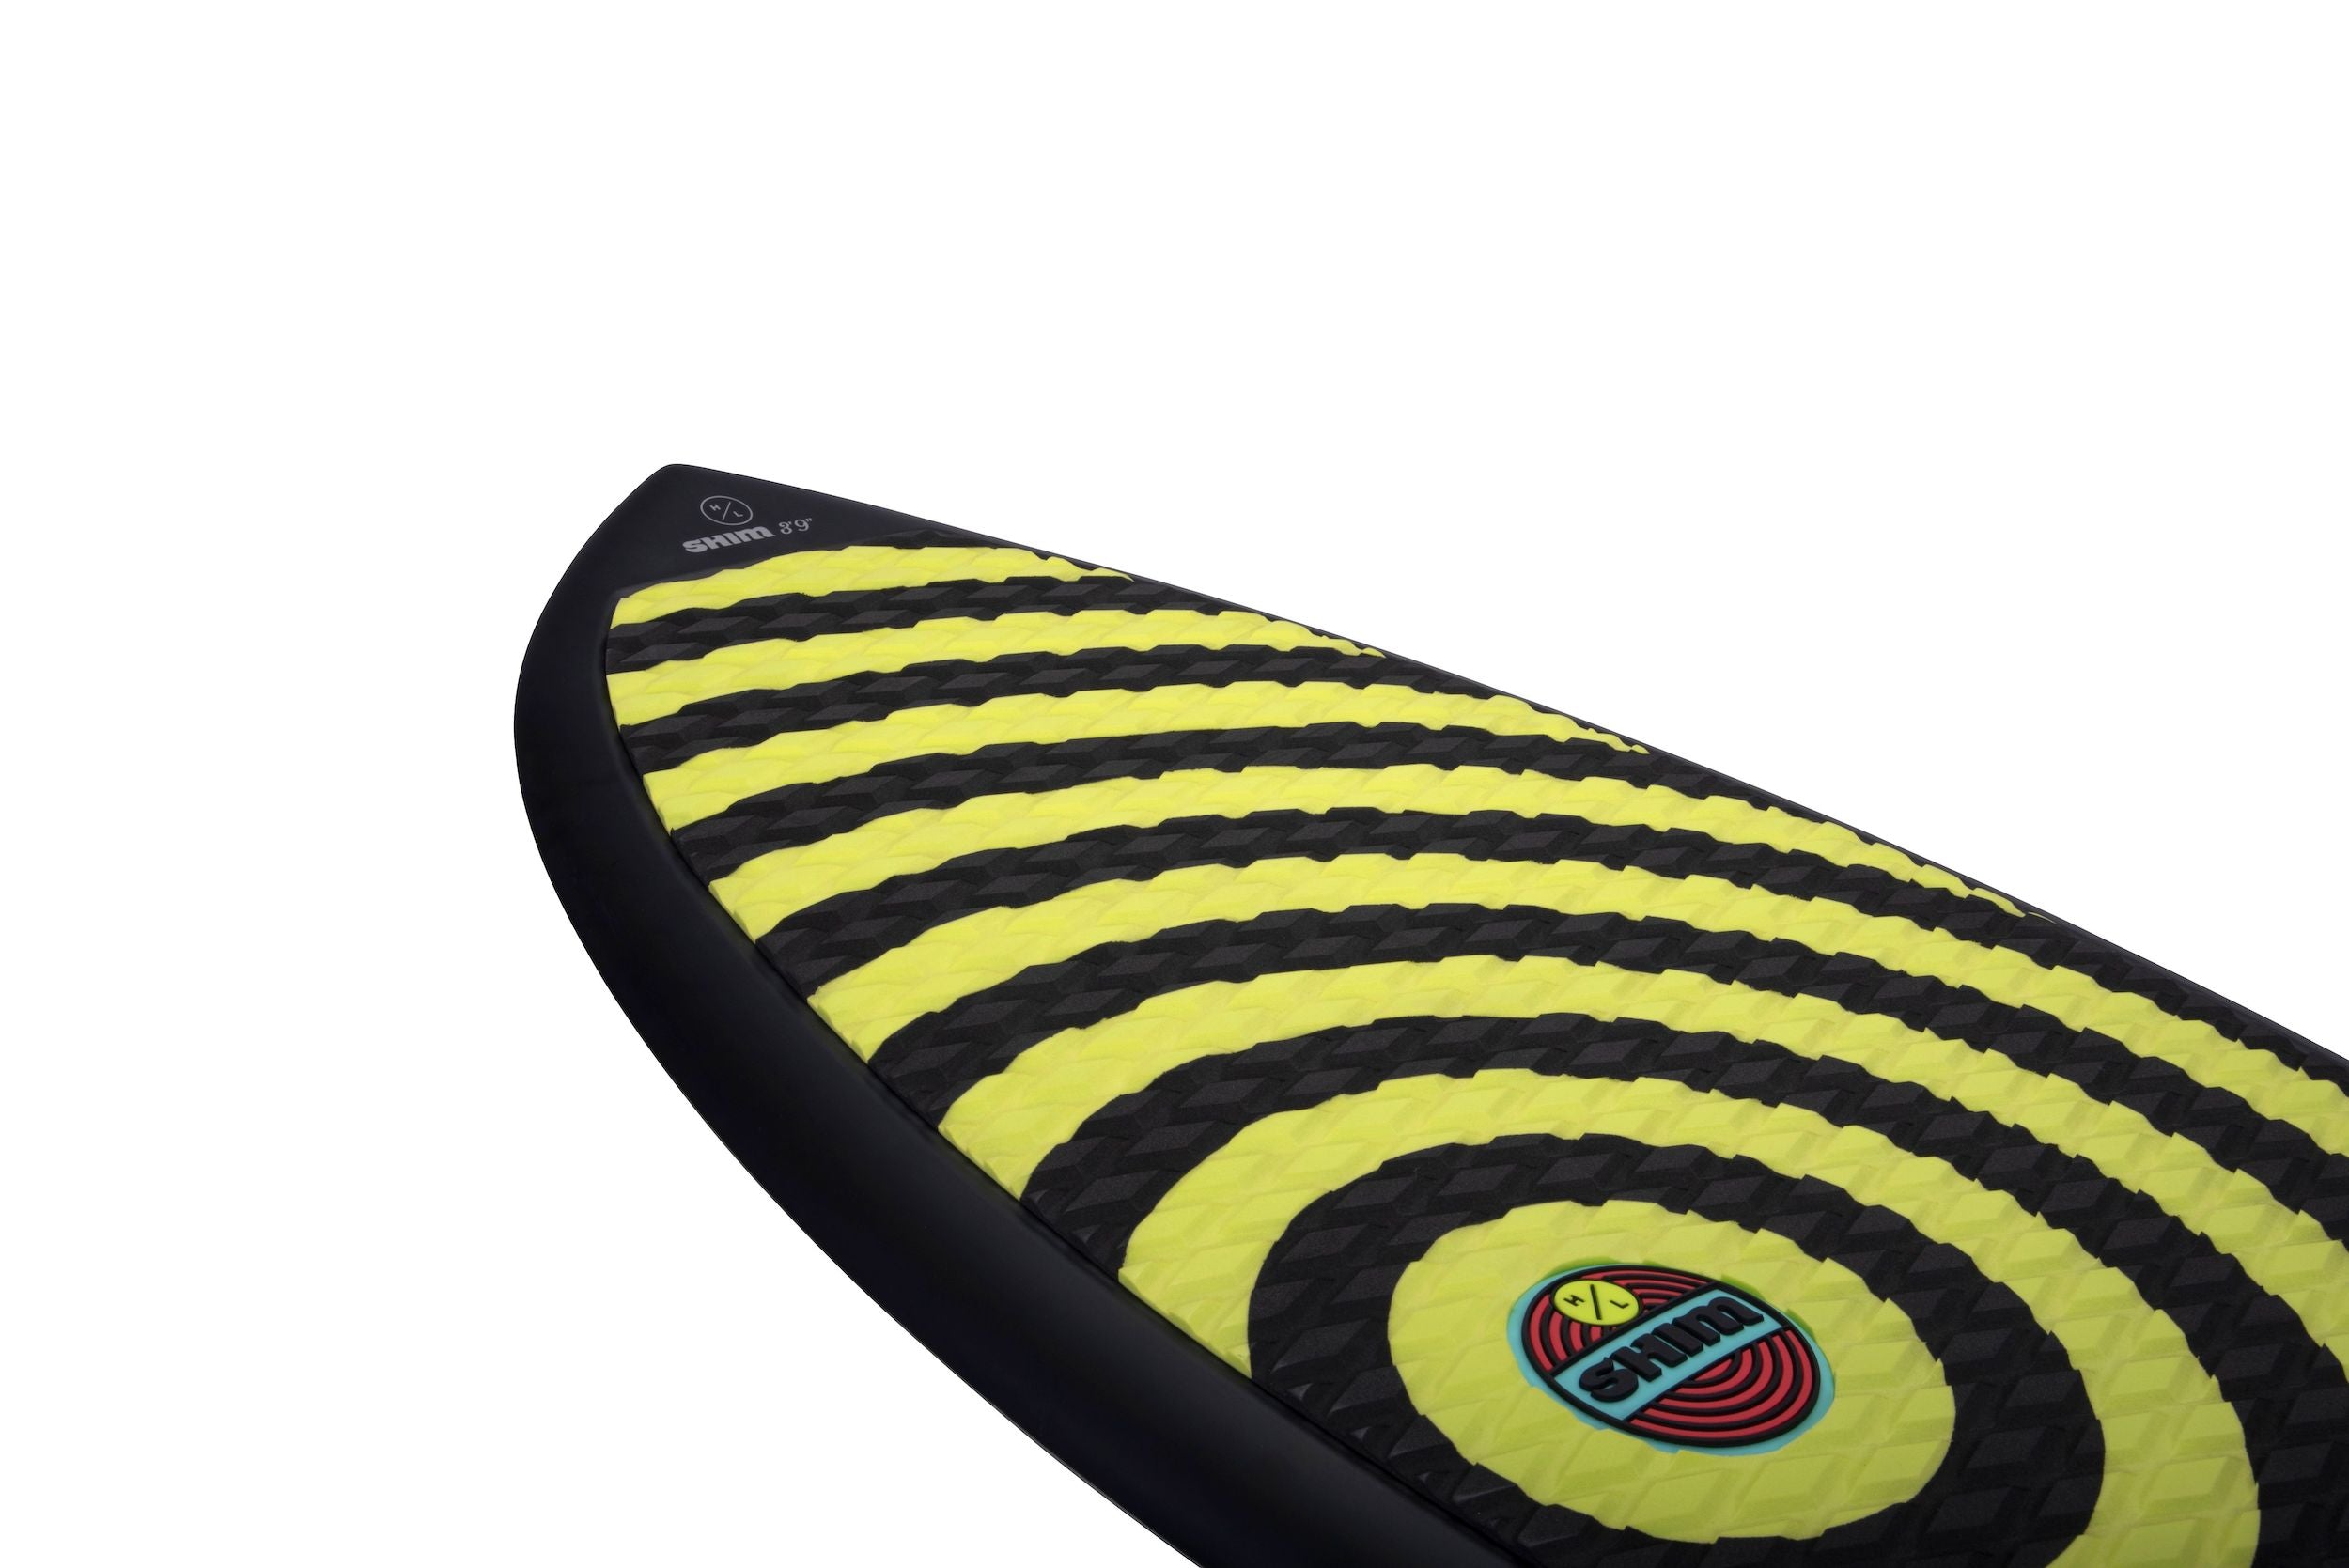 A Hyperlite 2024 Shim wakesurf board with a yellow and black design for the wakesurf enthusiast.